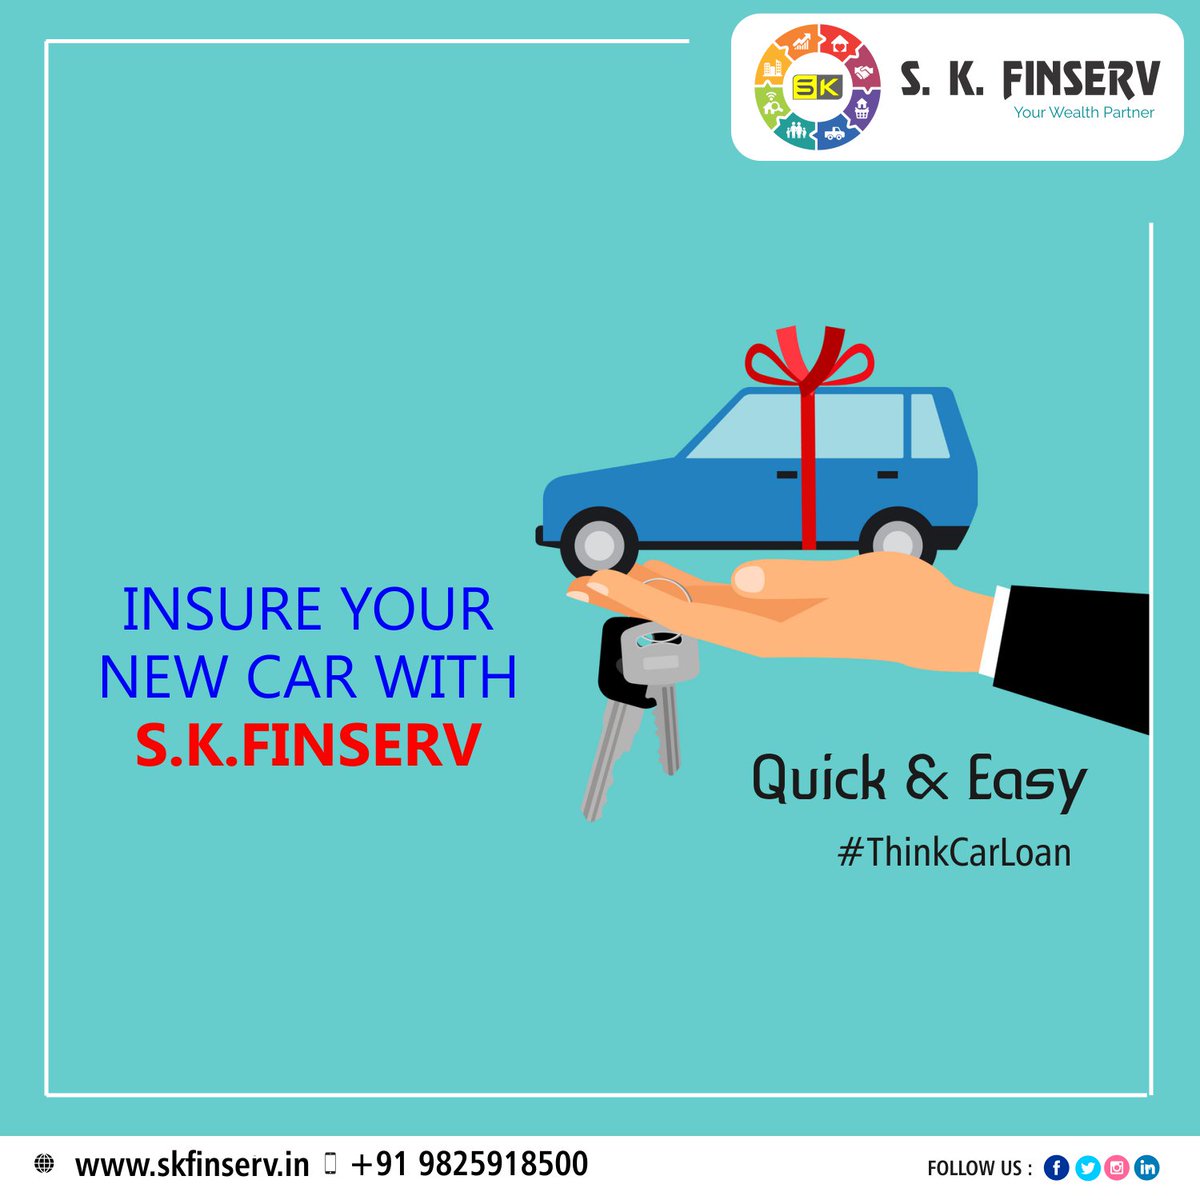 Insure your new car with #SkFinserv!!
Quick & Easy!!
Think Loan Think SK
S. K. Finserv  |  Your Wealth Partner
 #Finance #Loan #Morbi #SME #Corporate #Home #Medical #Insurance #HomeLoan #Rajkot #ThinkCarLoan #CarLoan #ThinkSk #ThinkLoan #Gujarat  #NewCarLoan